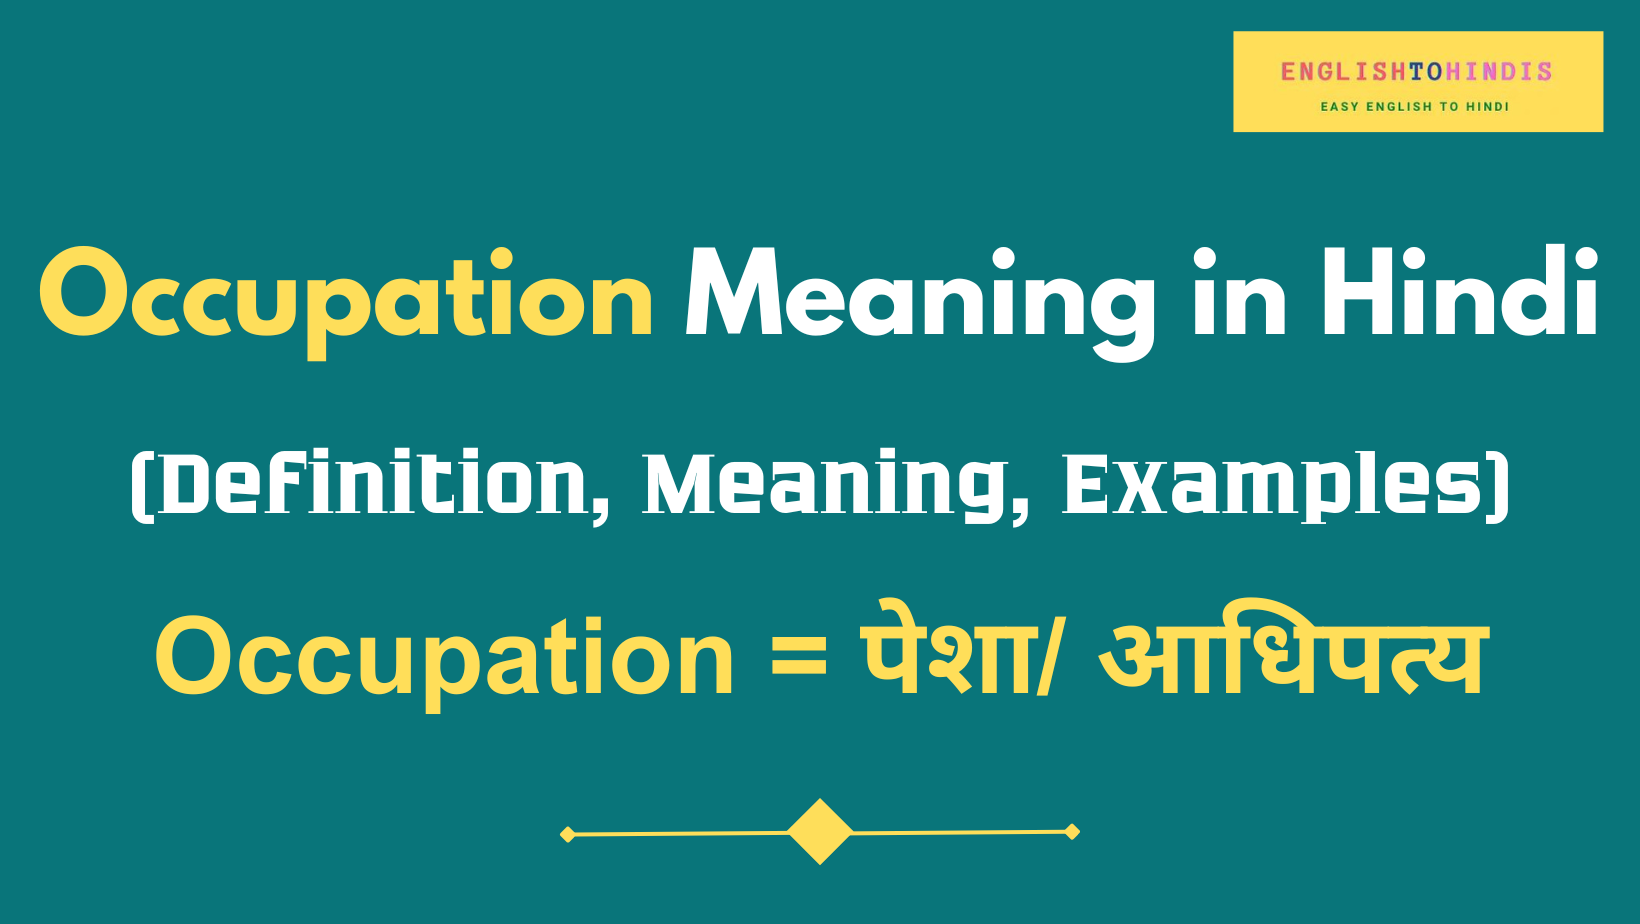 Occupation Meaning in Hindi